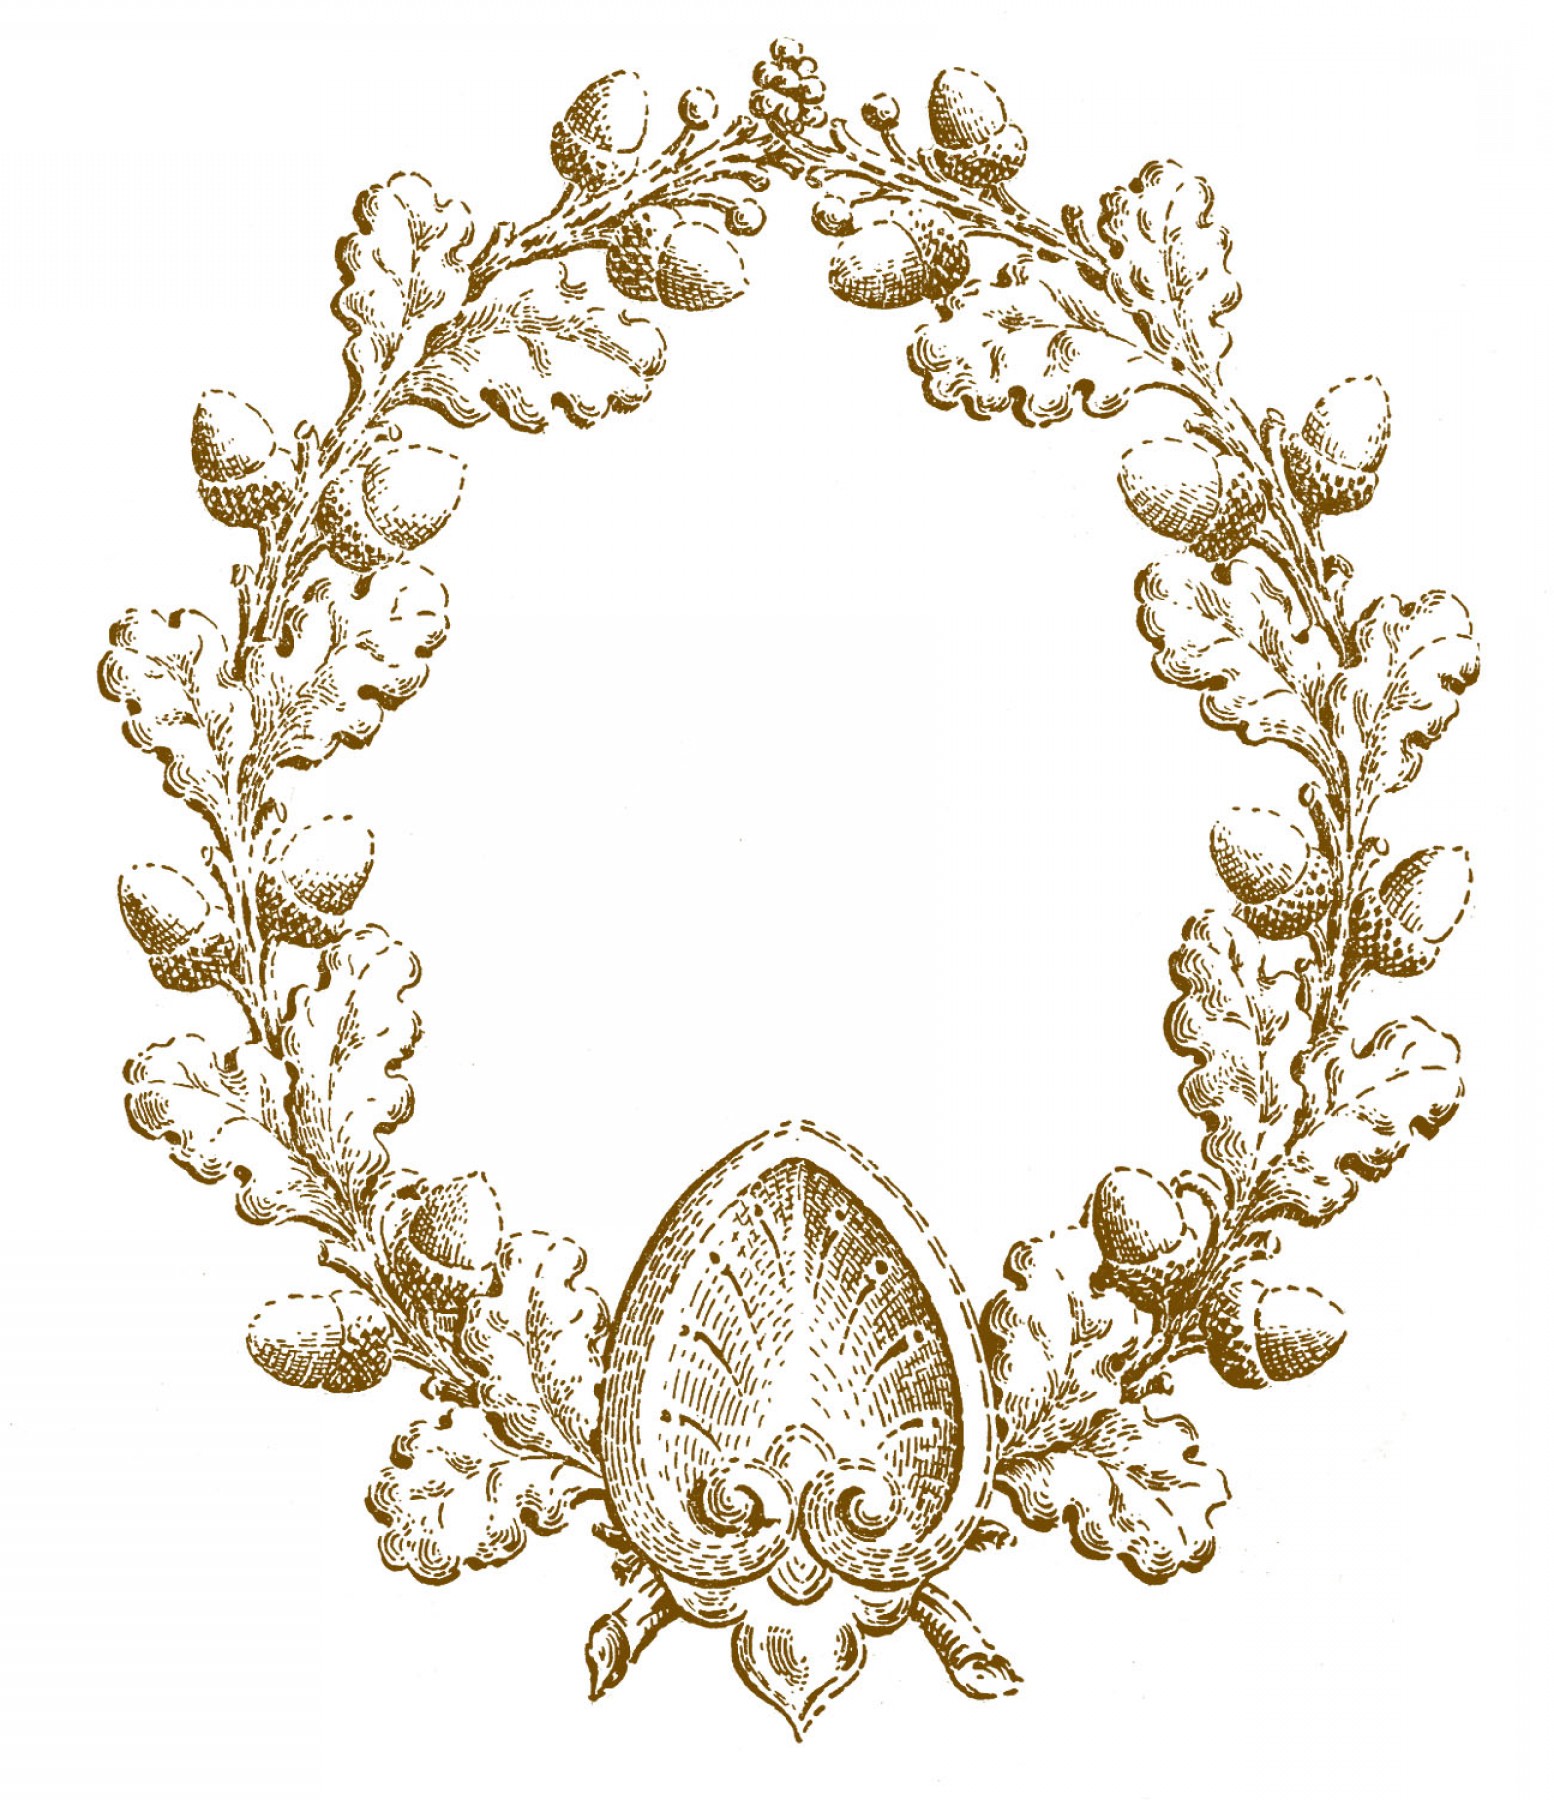 Acorn clipart wreath, Acorn wreath Transparent FREE for download on ...